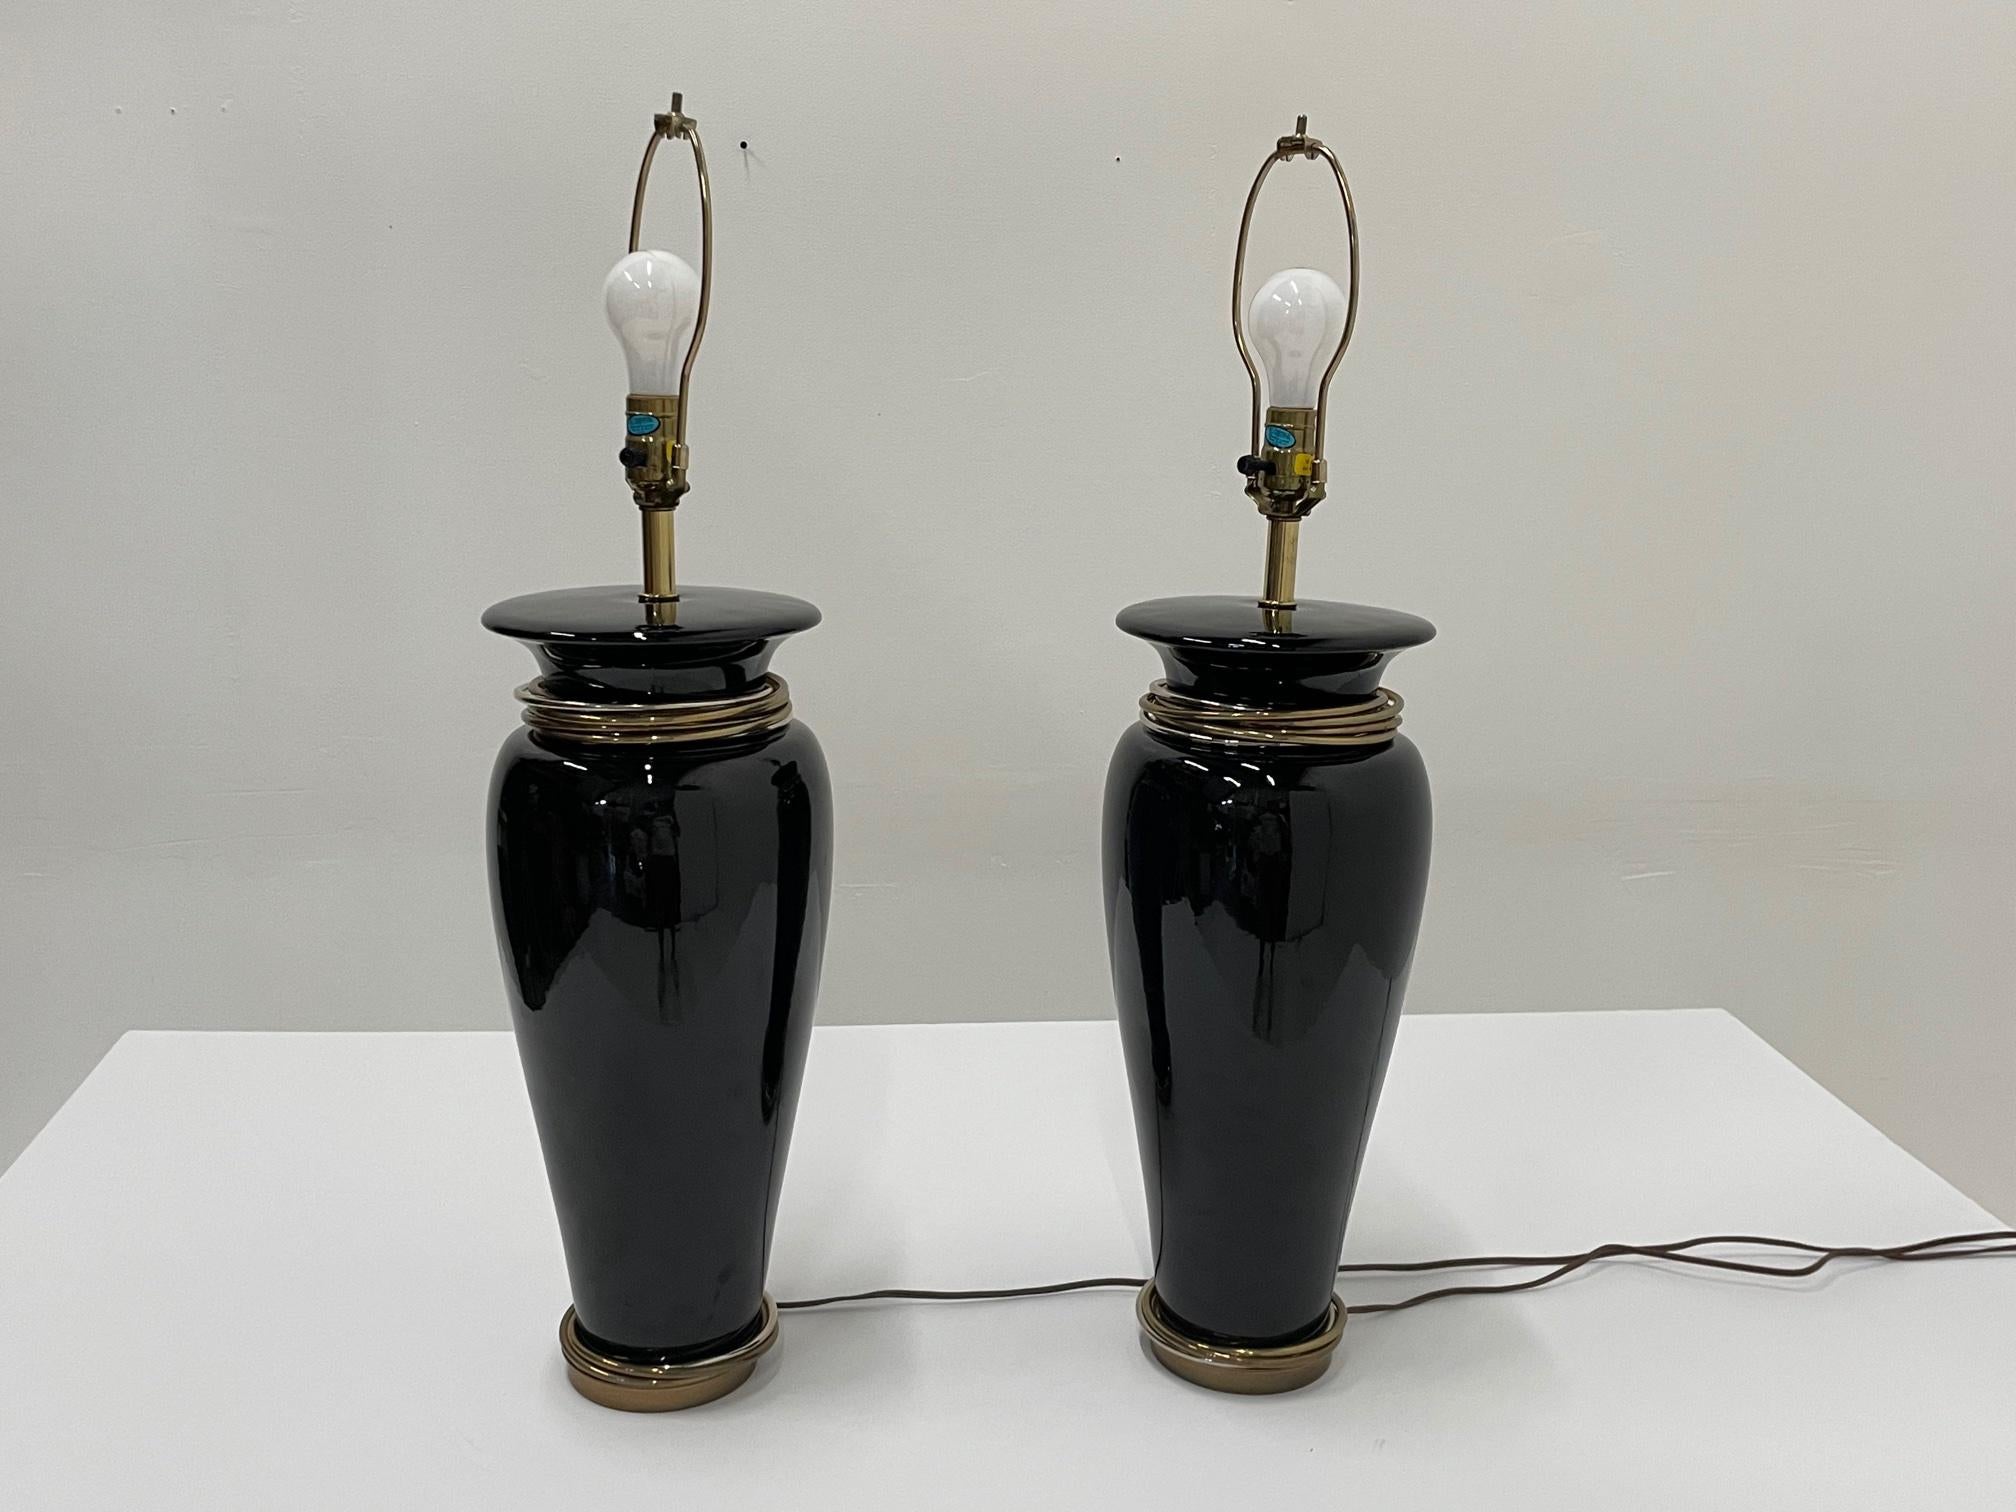 Glamorous Pair of Chapman Black Ceramic Table Lamps with Brass & Steel Rings In Good Condition For Sale In Hopewell, NJ